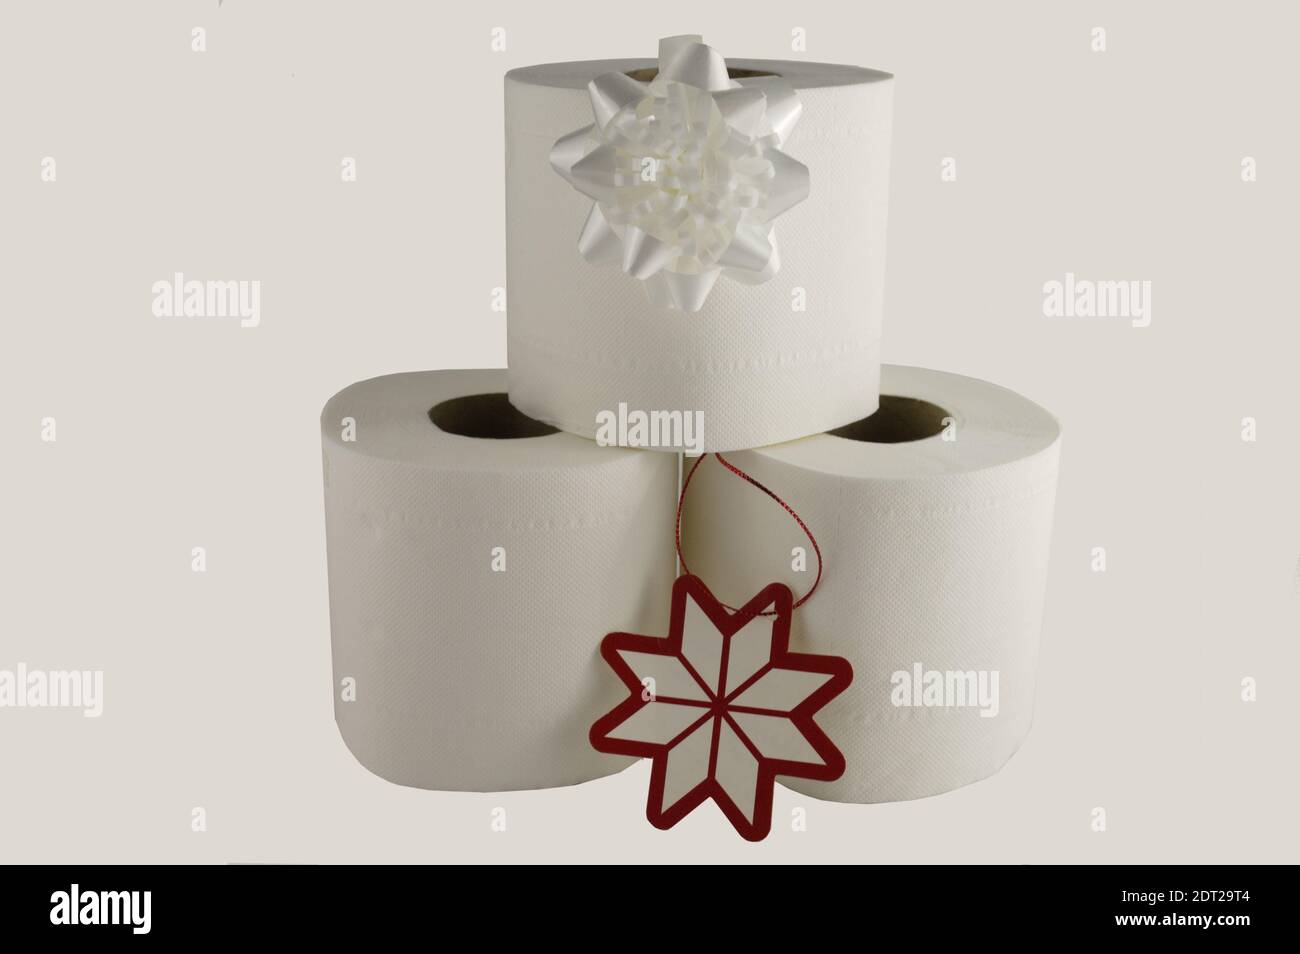 Three white toilet rolls with a white bow and red and white gift tag, practical gifts concept Stock Photo